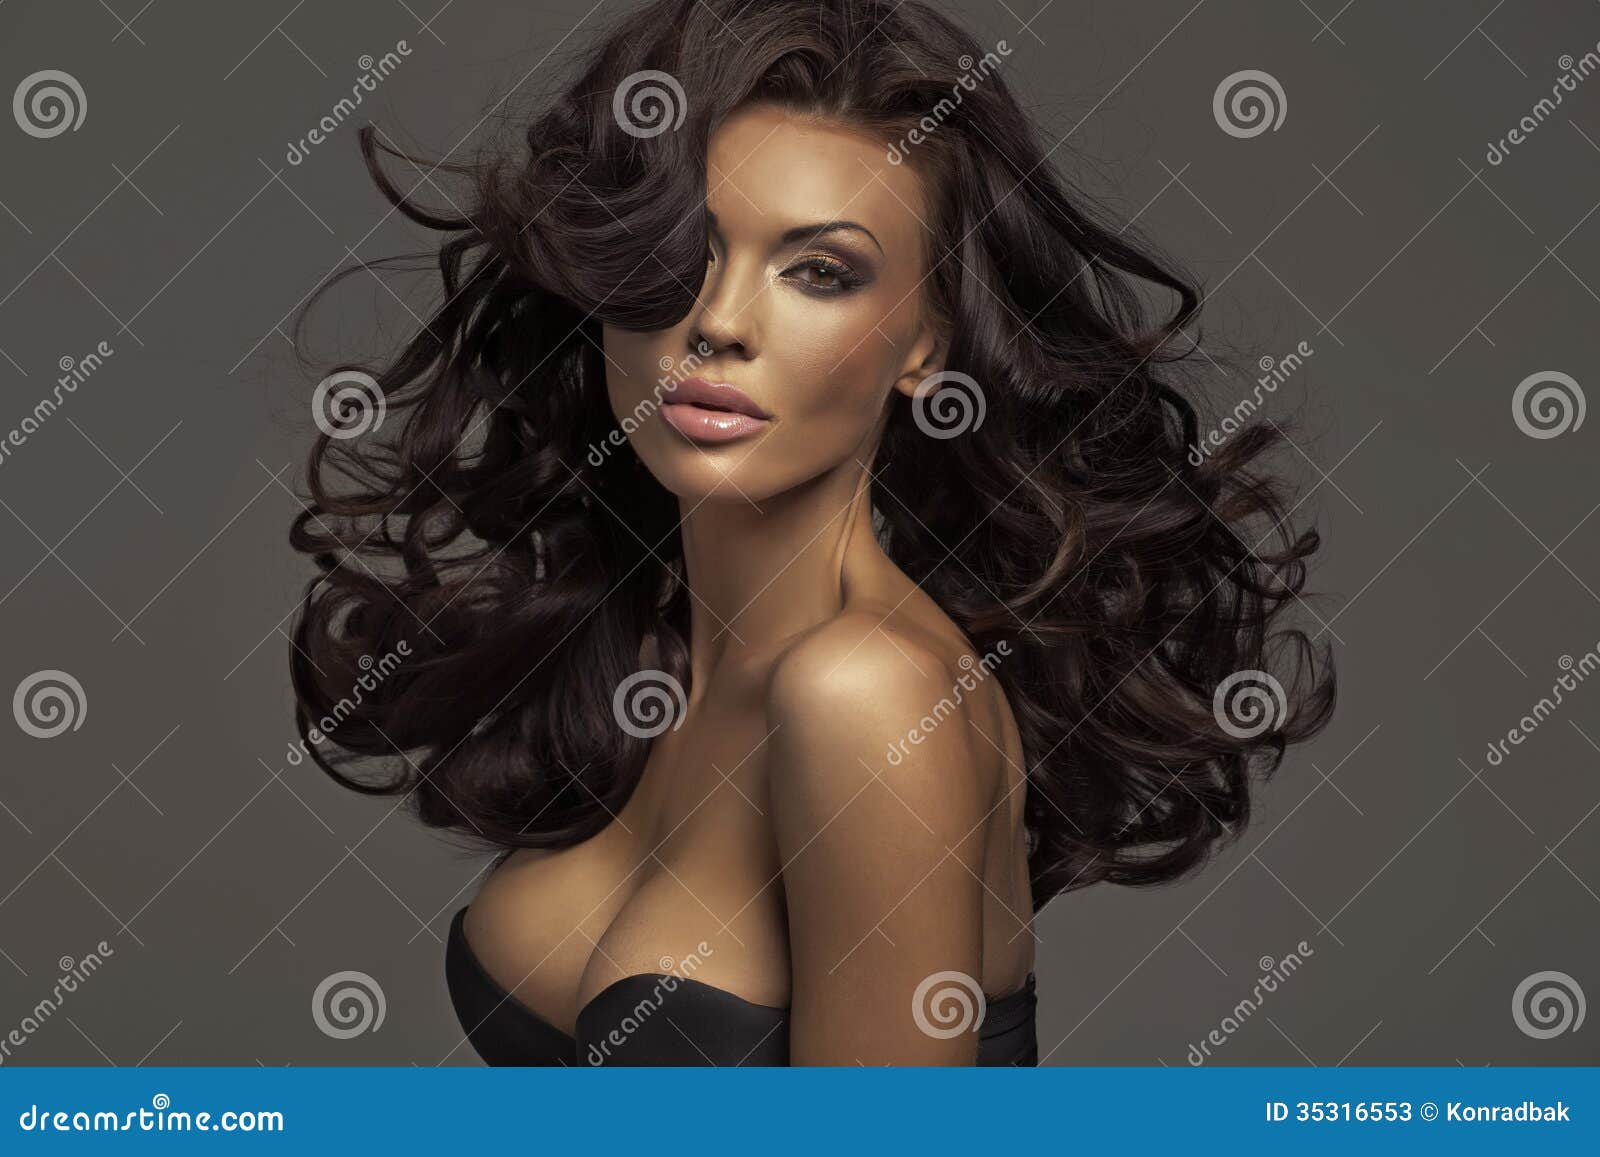 brunette lady with dark complexion